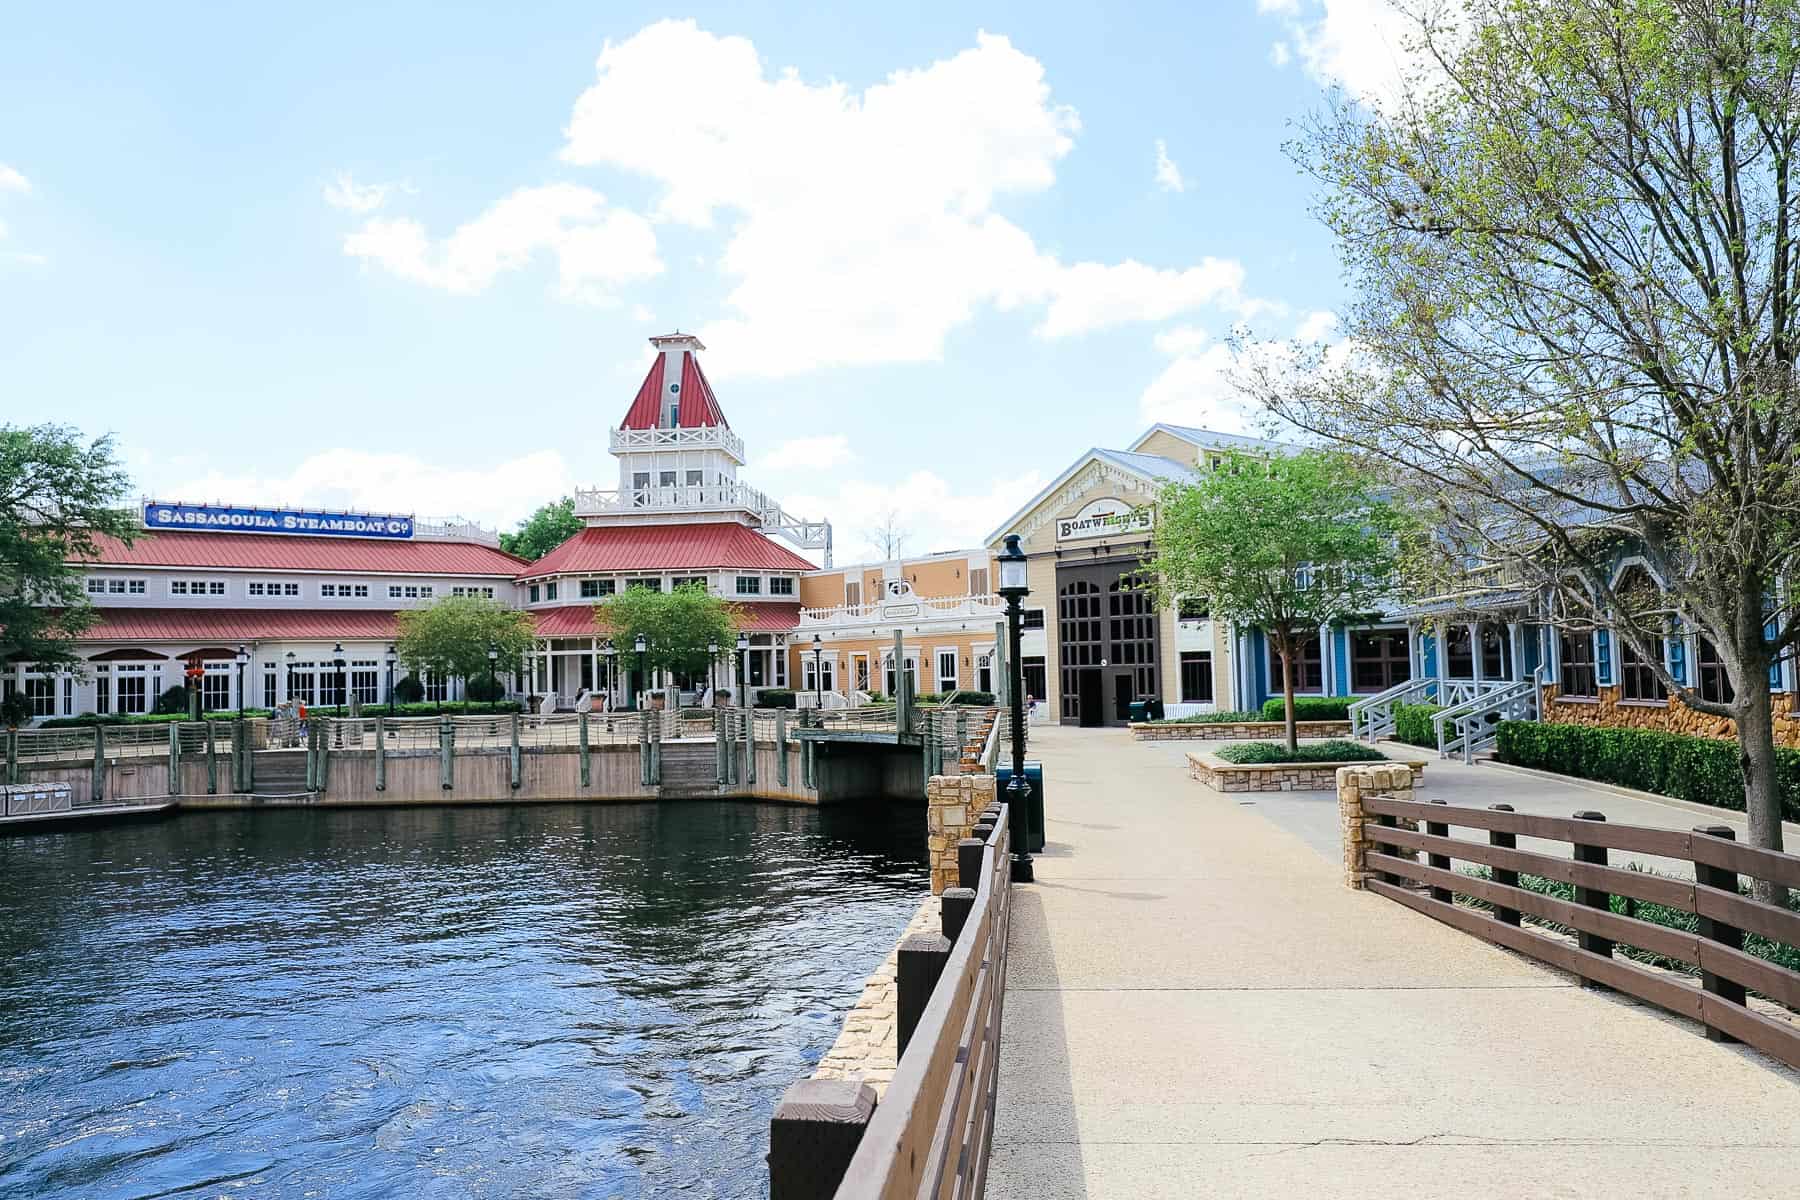 the bridge that connects the resort to the central lobby and restaurants at Port Orleans Riverside Resort 